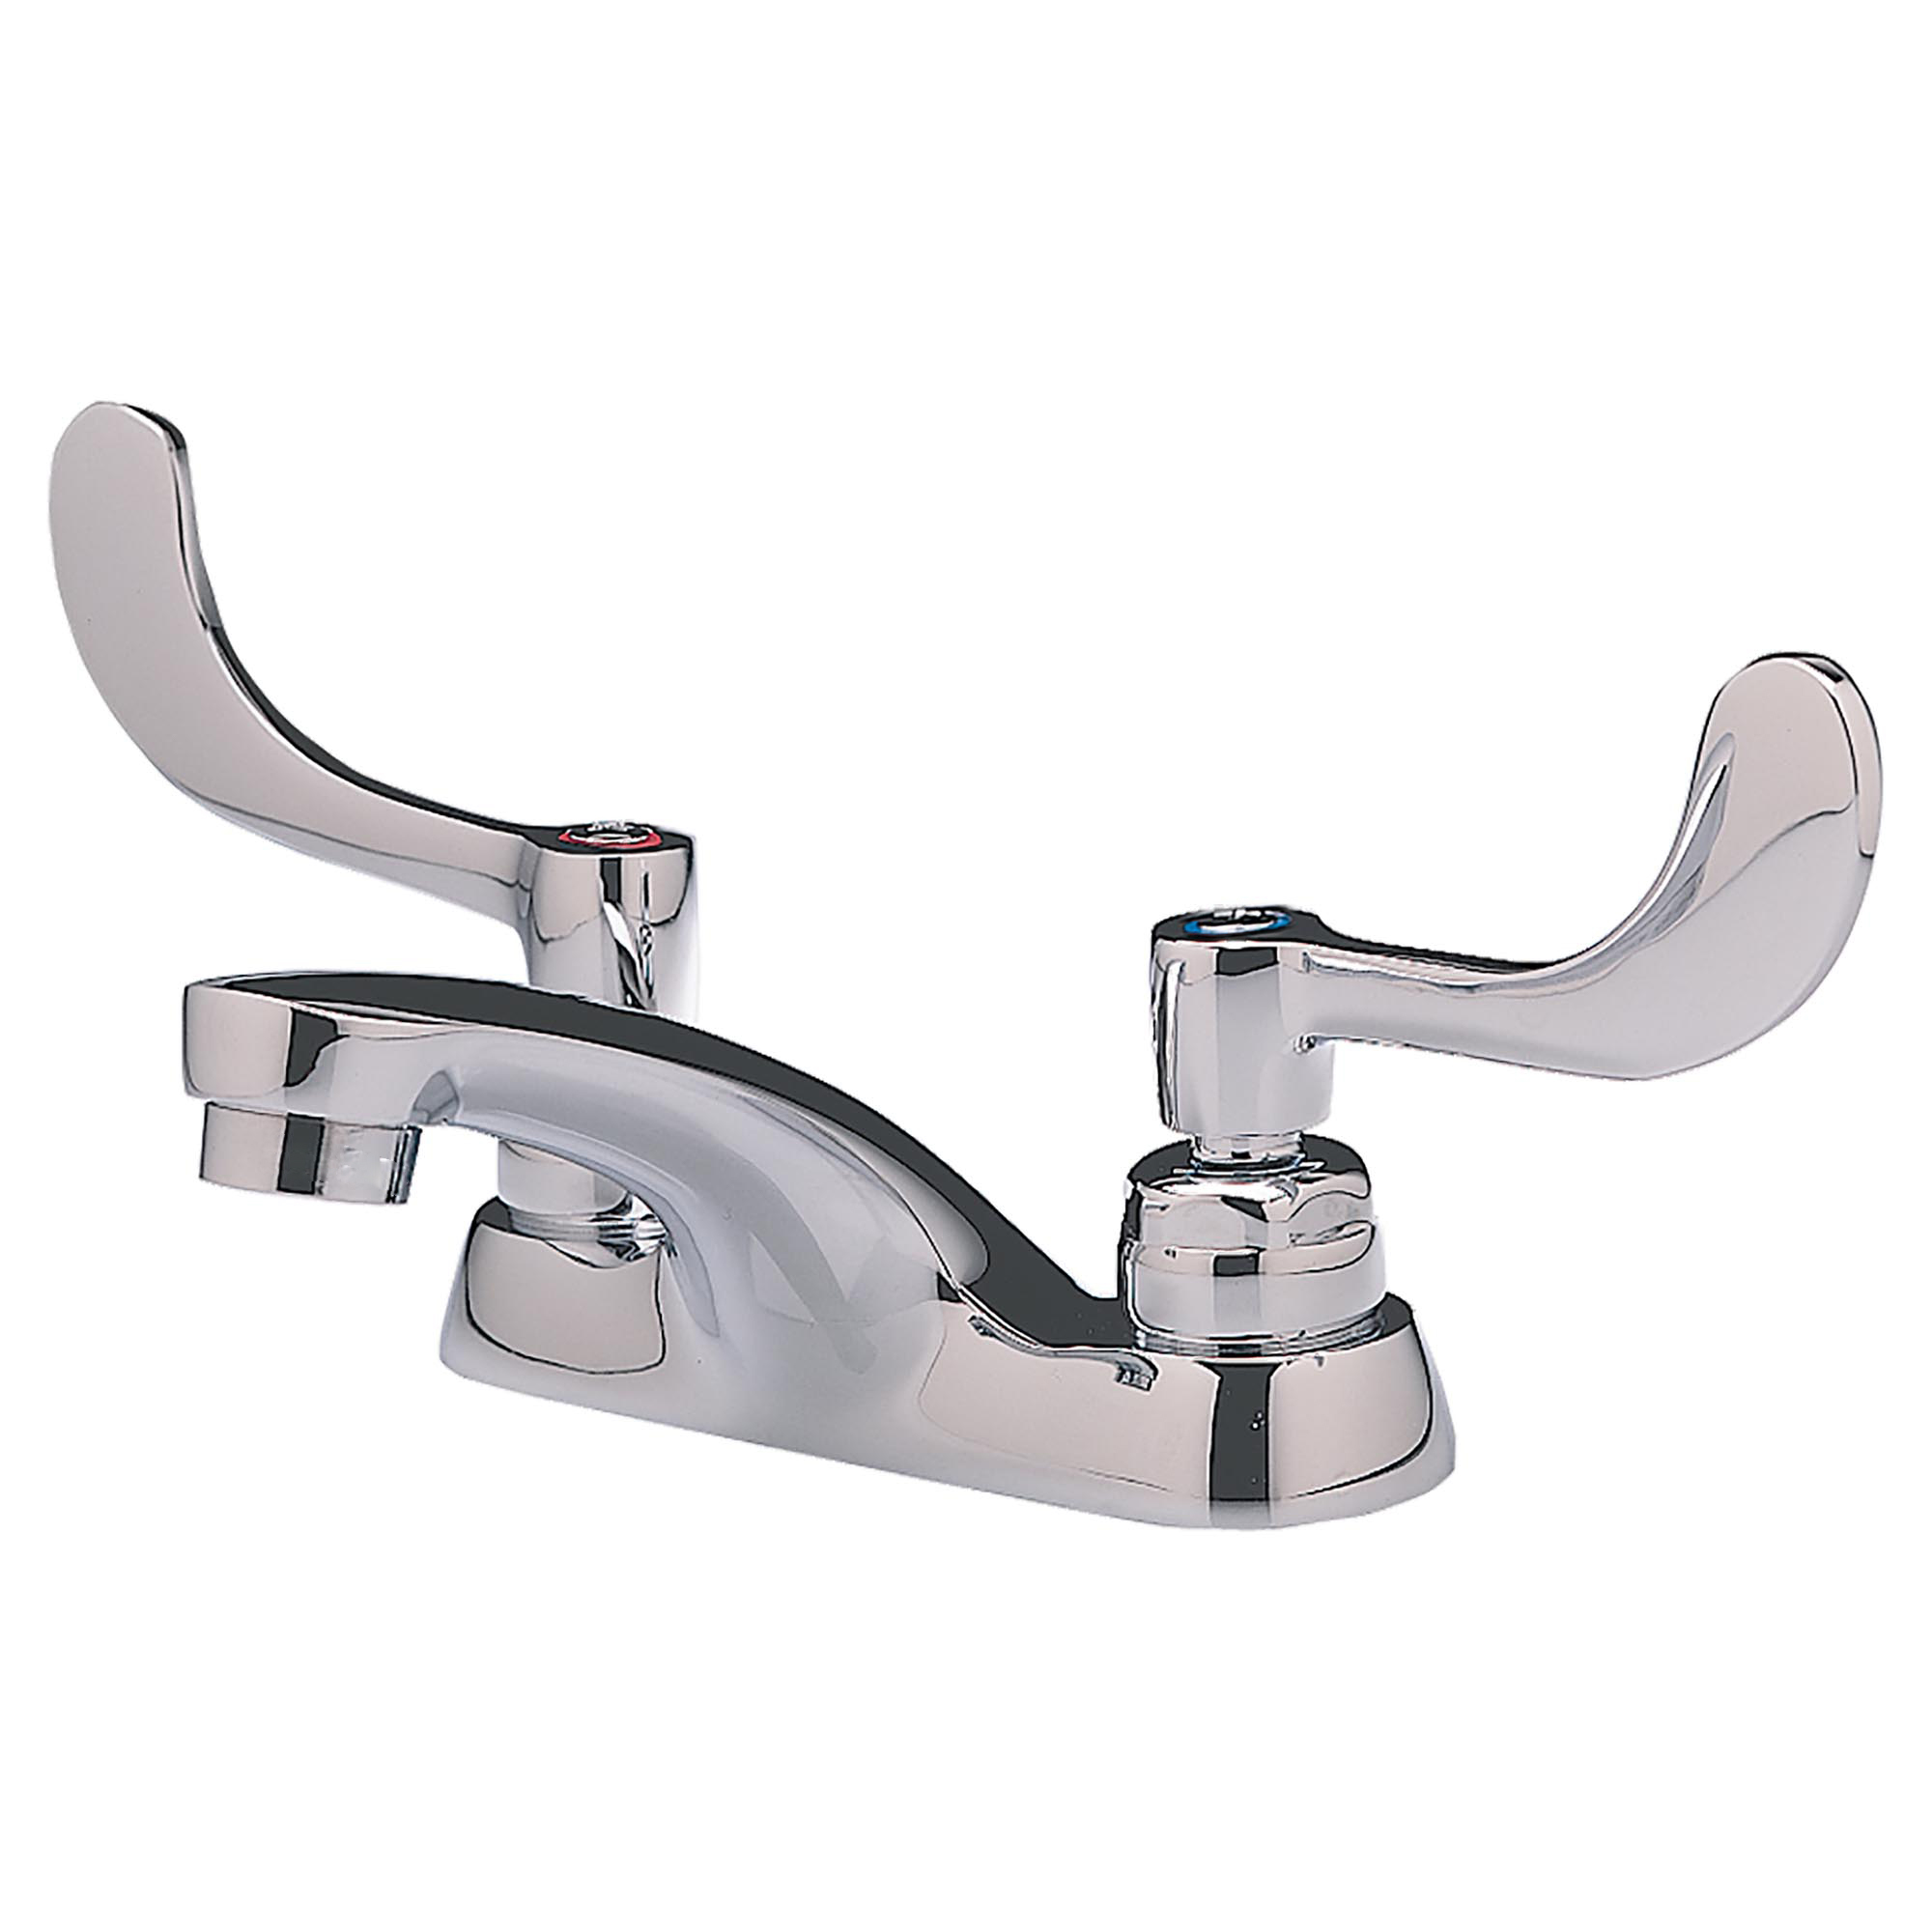 Monterrey™ 4-Inch Centerset Cast Faucet With Wrist Blade Handles 0.5 gpm/1.9 Lpm With Grid Drain